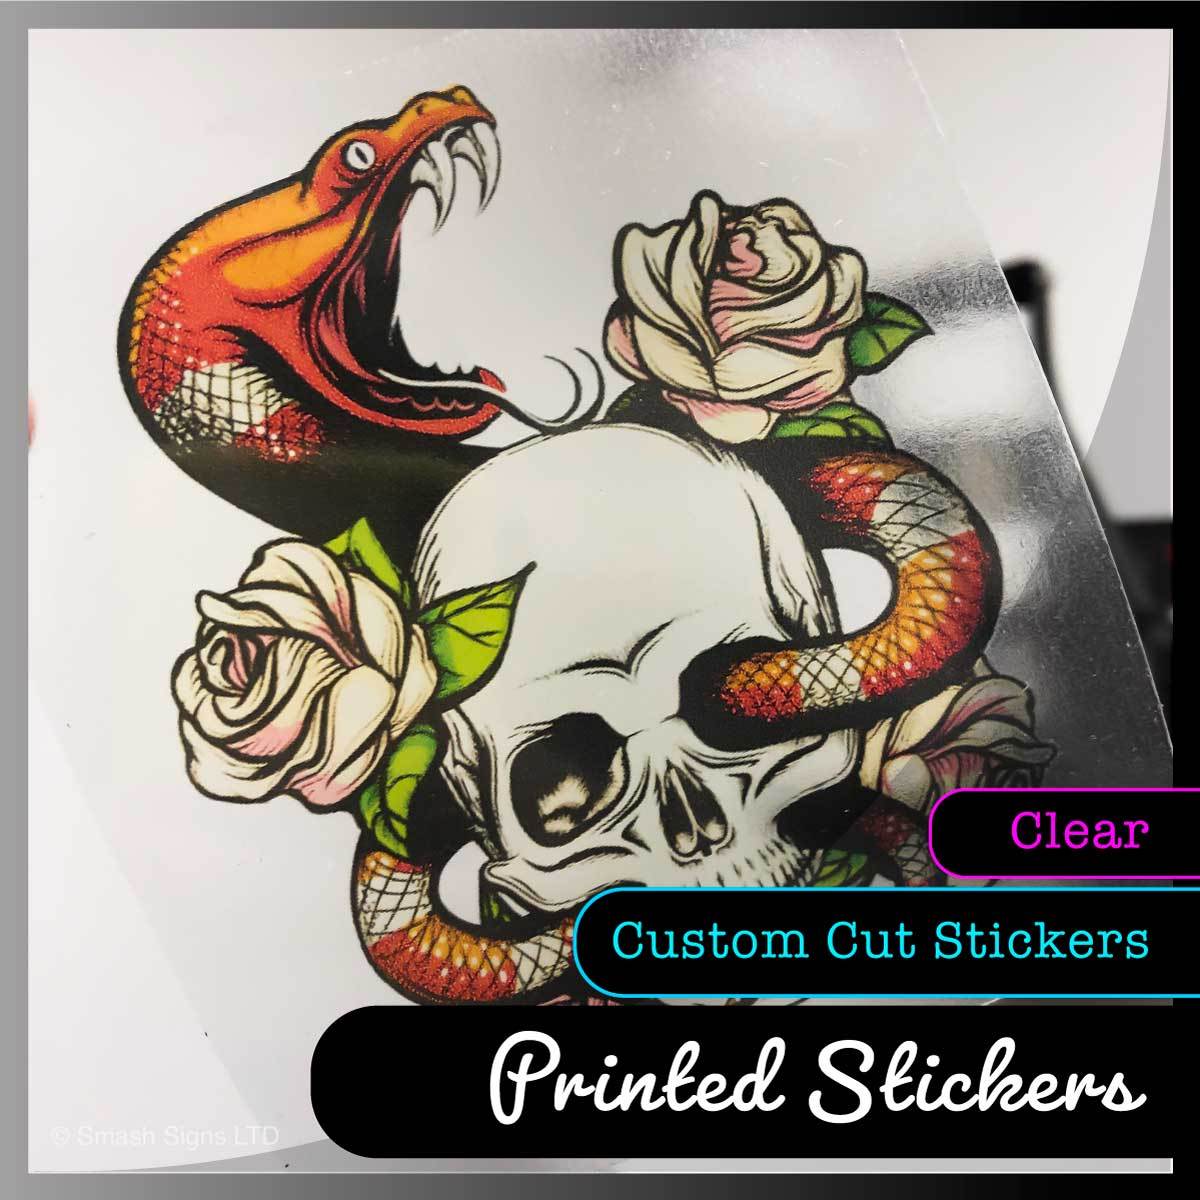 Clear stickers printed full colour 